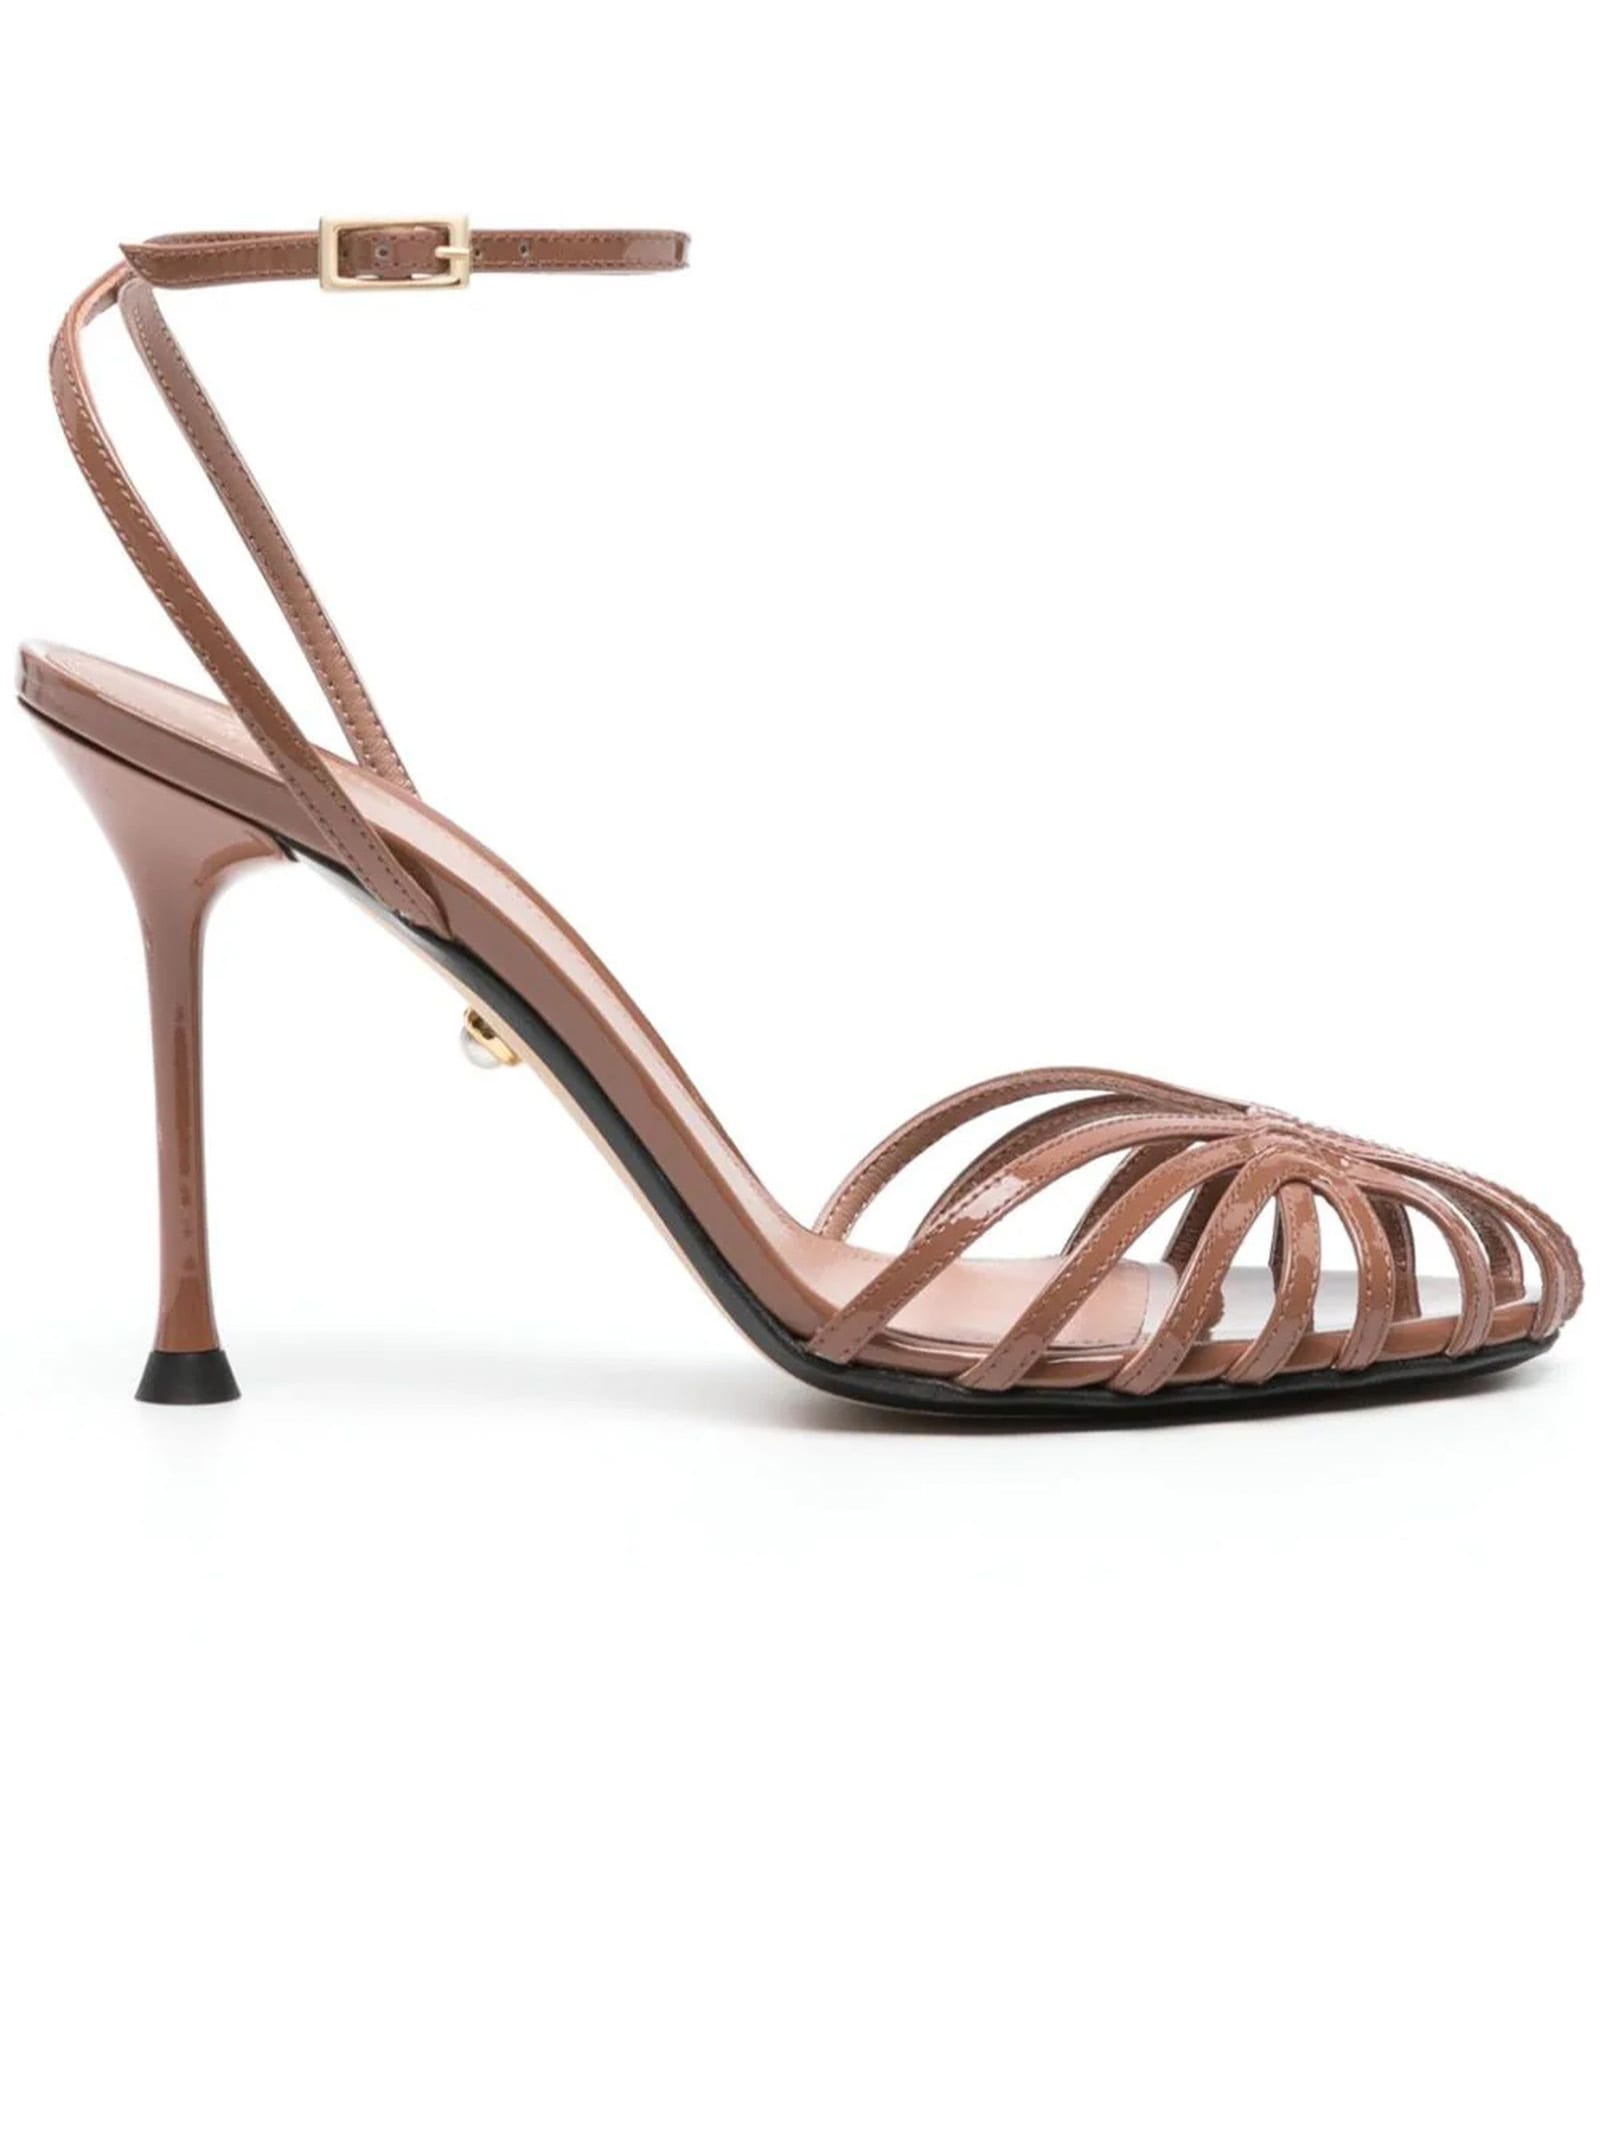 Chocolate Brown Calf Leather Sandals